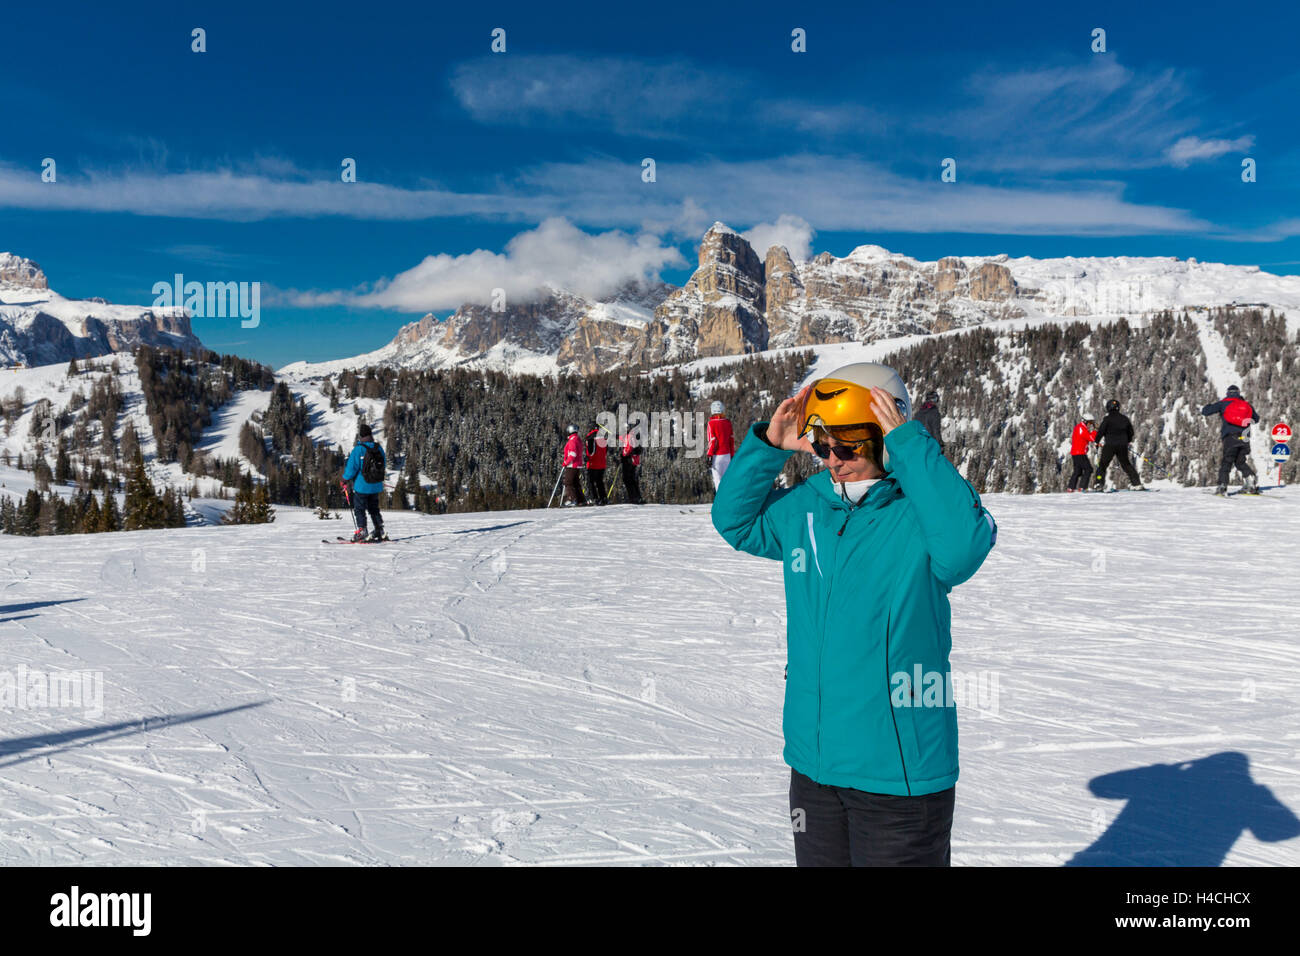 56 year old woman is sitting up the ski helmet, skiing region of Alta Badia, Sassongher, 2665 m, South Tyrol, Alto Adige, the Dolomites, Italy, Europe Stock Photo